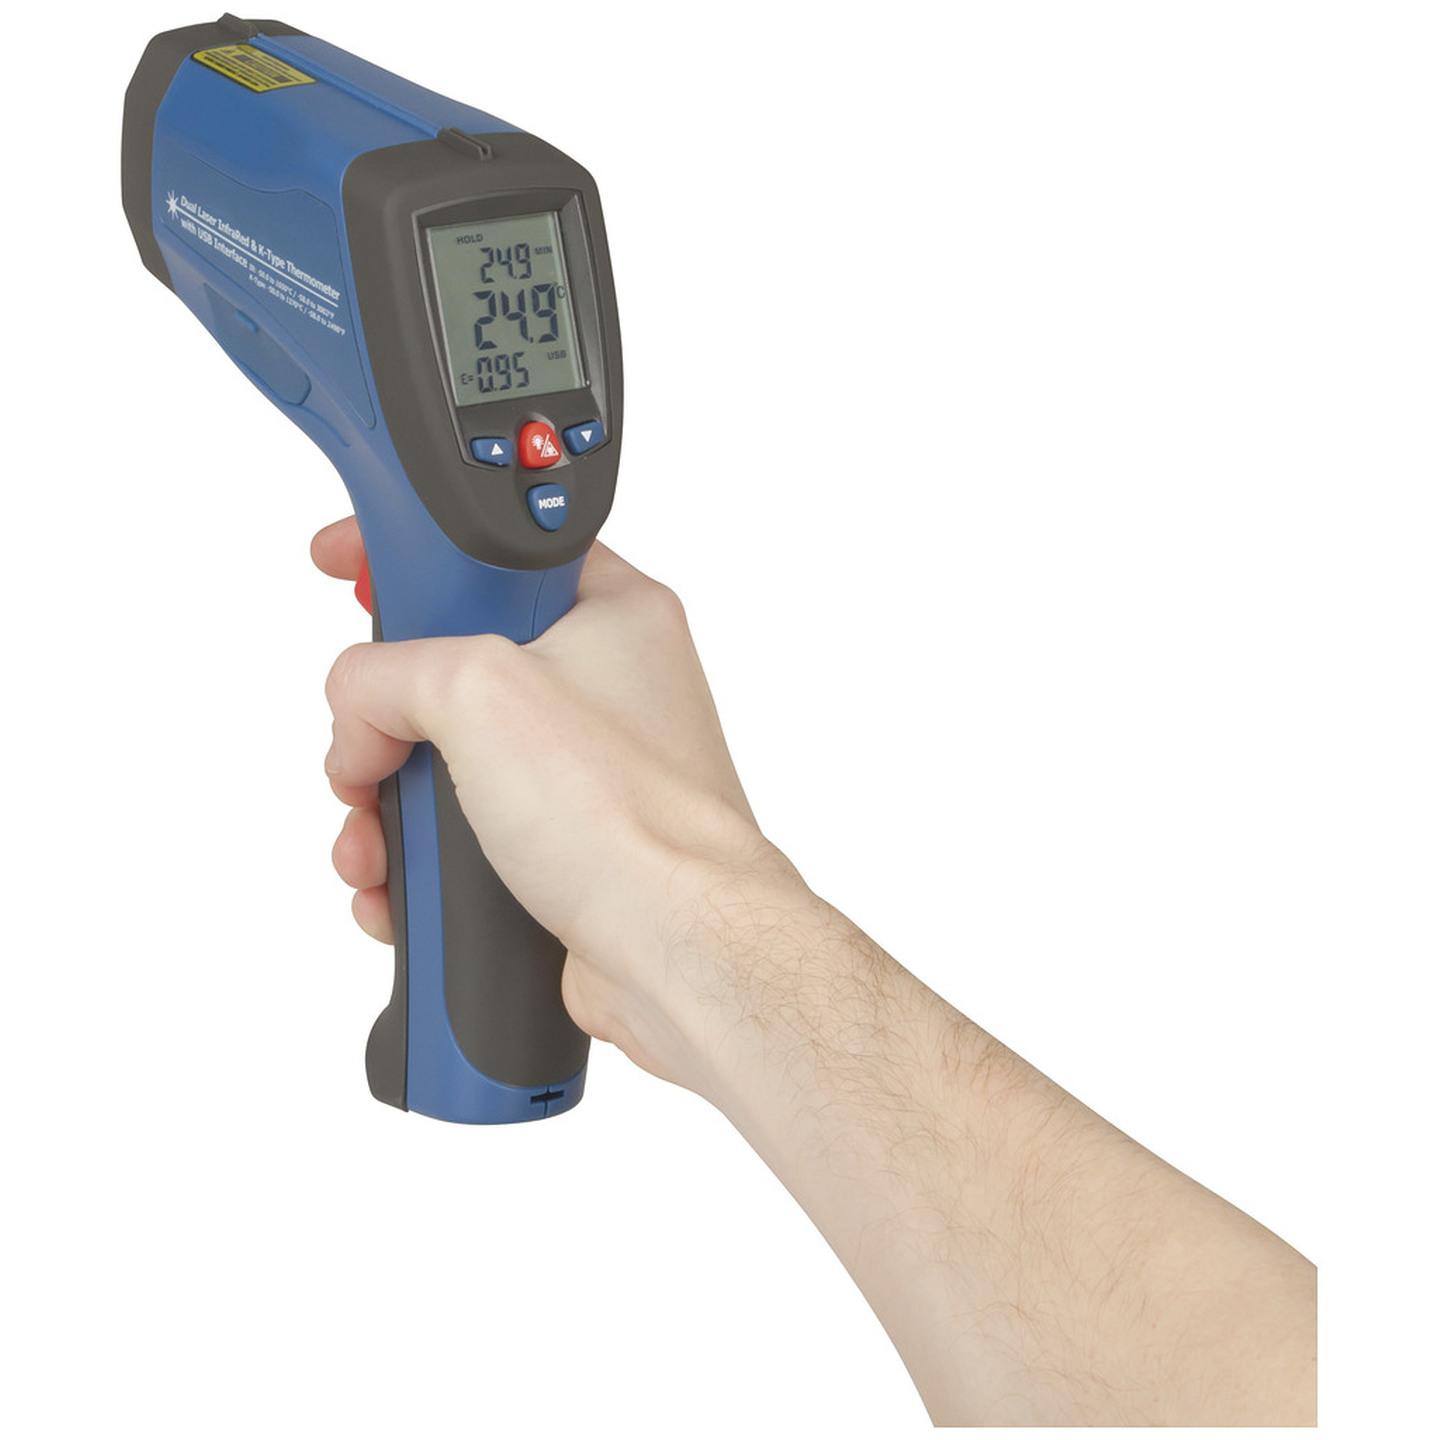 Pro High Temperature Non-Contact Thermometer with K-Type Probe Support and USB